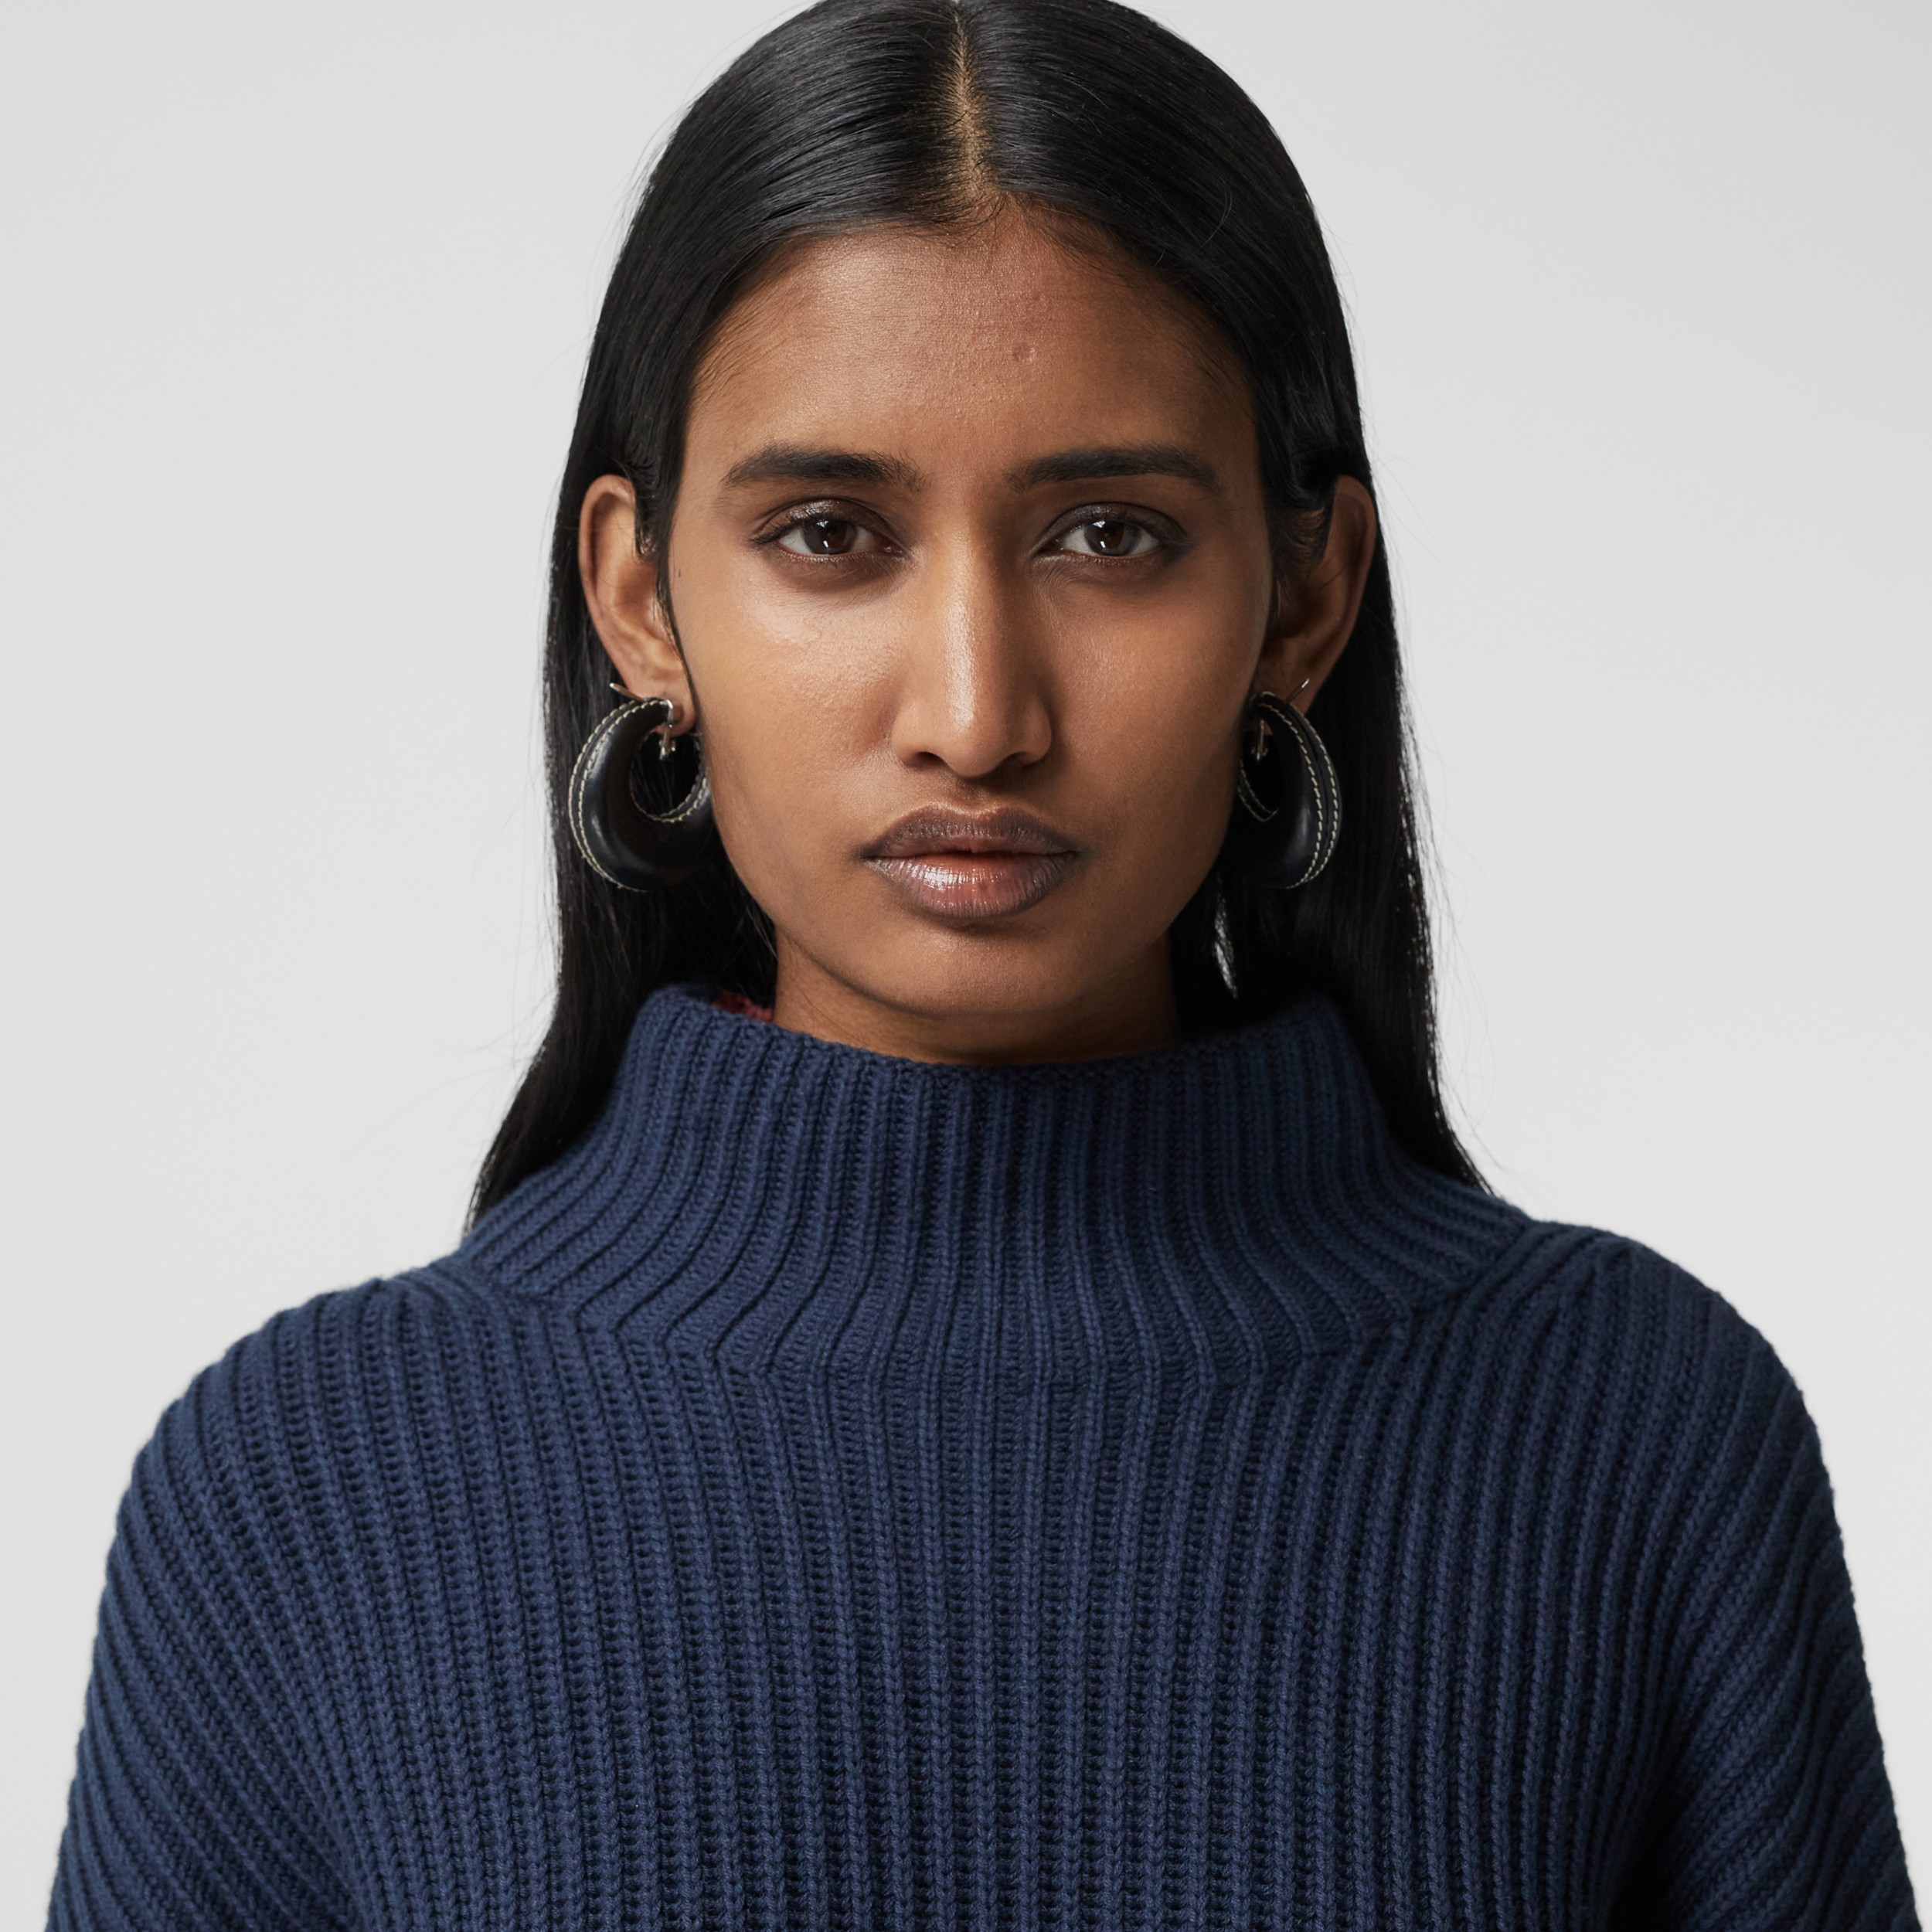 Rib Knit Cotton Cashmere Oversized Sweater in Ink Blue - Women | Burberry